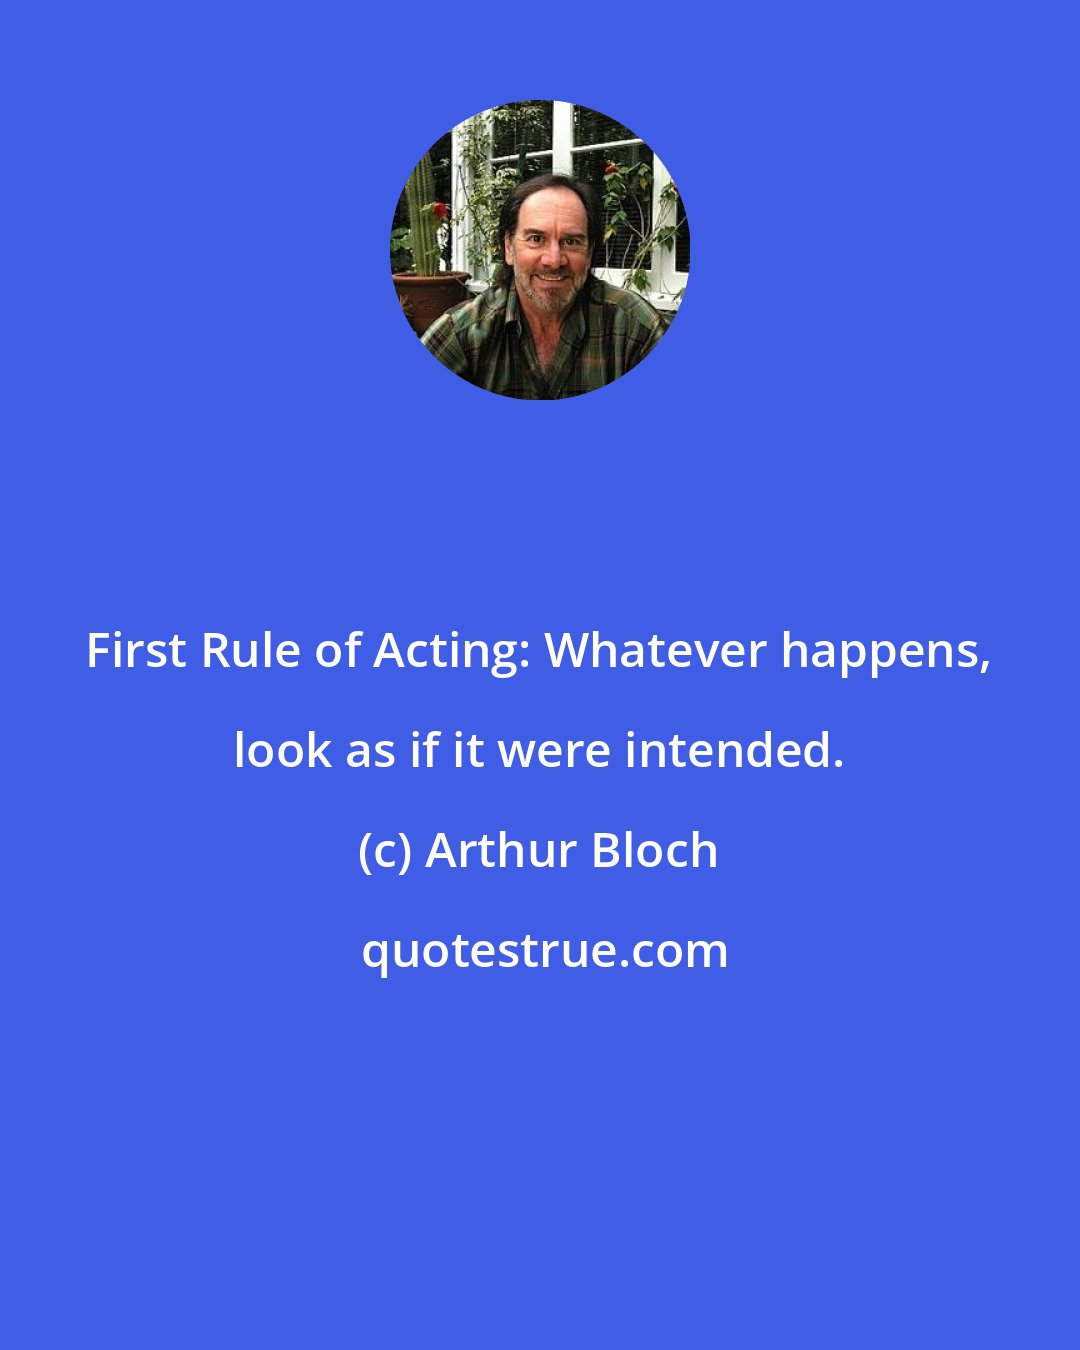 Arthur Bloch: First Rule of Acting: Whatever happens, look as if it were intended.